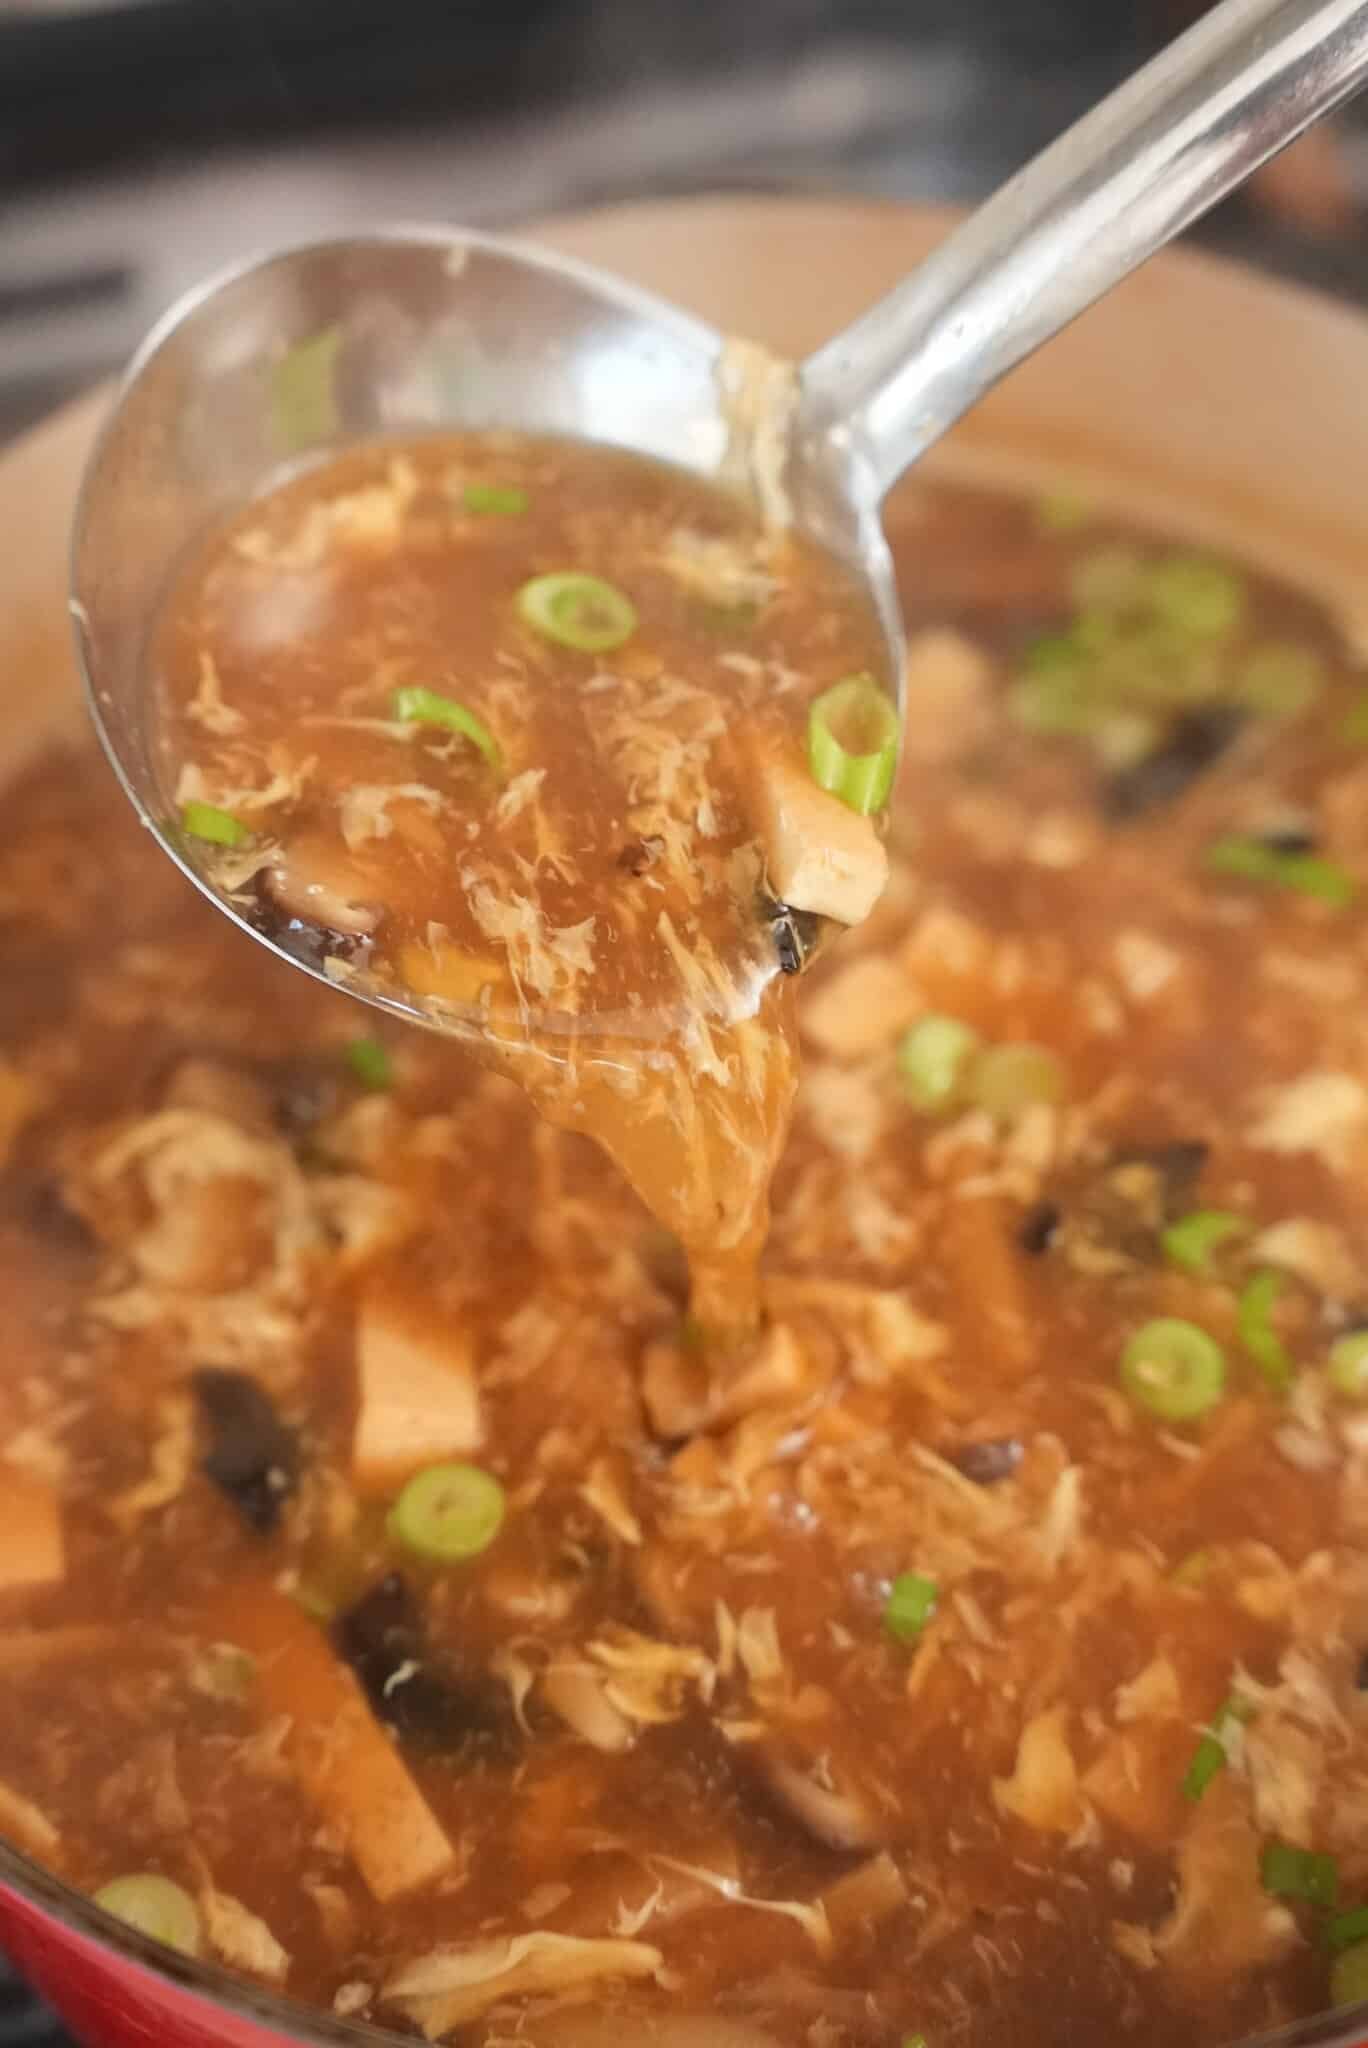 https://cjeatsrecipes.com/wp-content/uploads/2023/01/Hot-And-Sour-Soup-with-scallions-in-pot-scaled.jpg